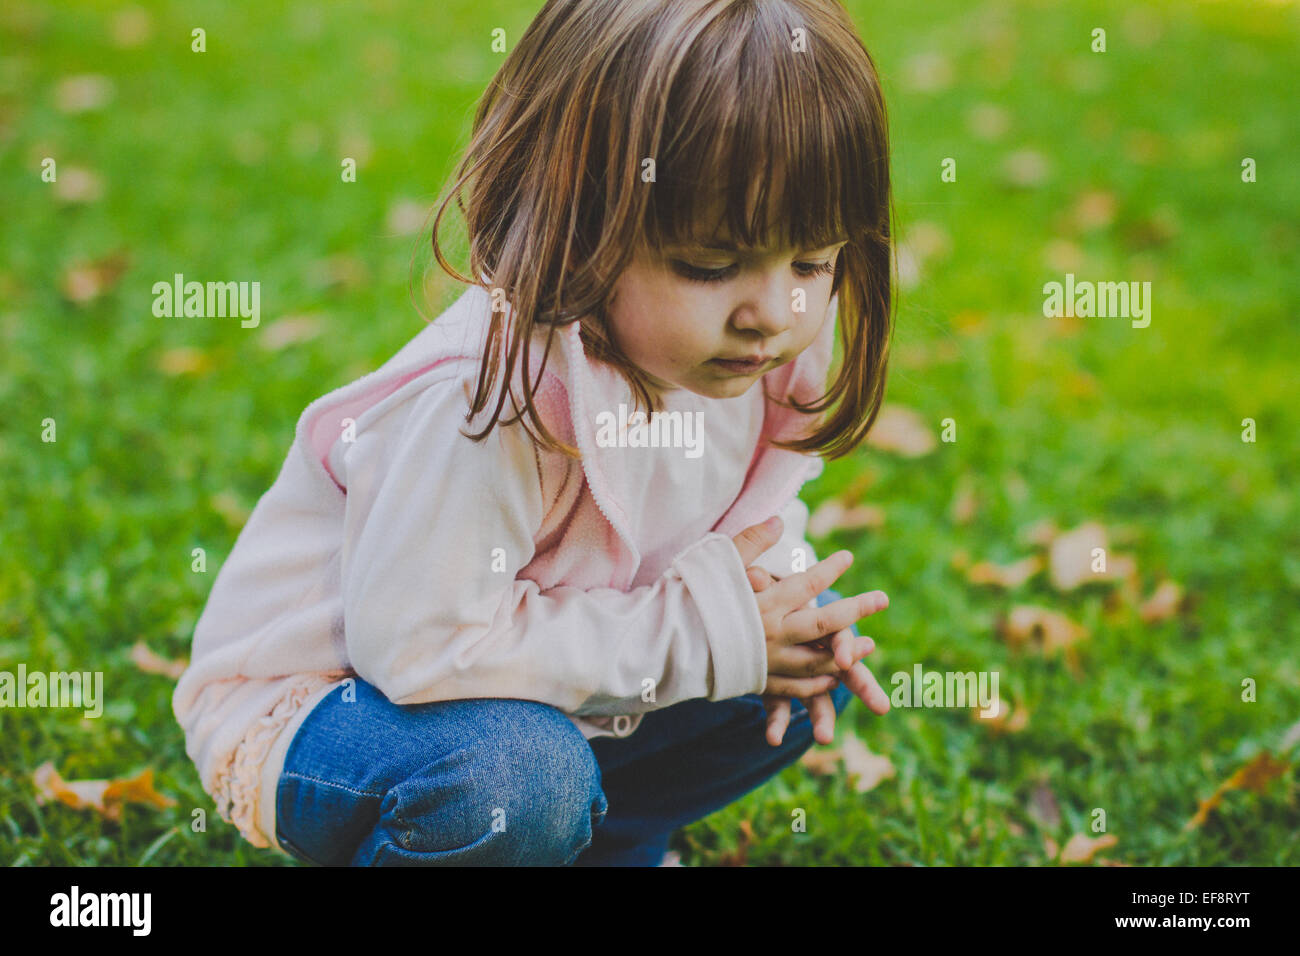 Portrait of girl crouching in a public park Stock Photo